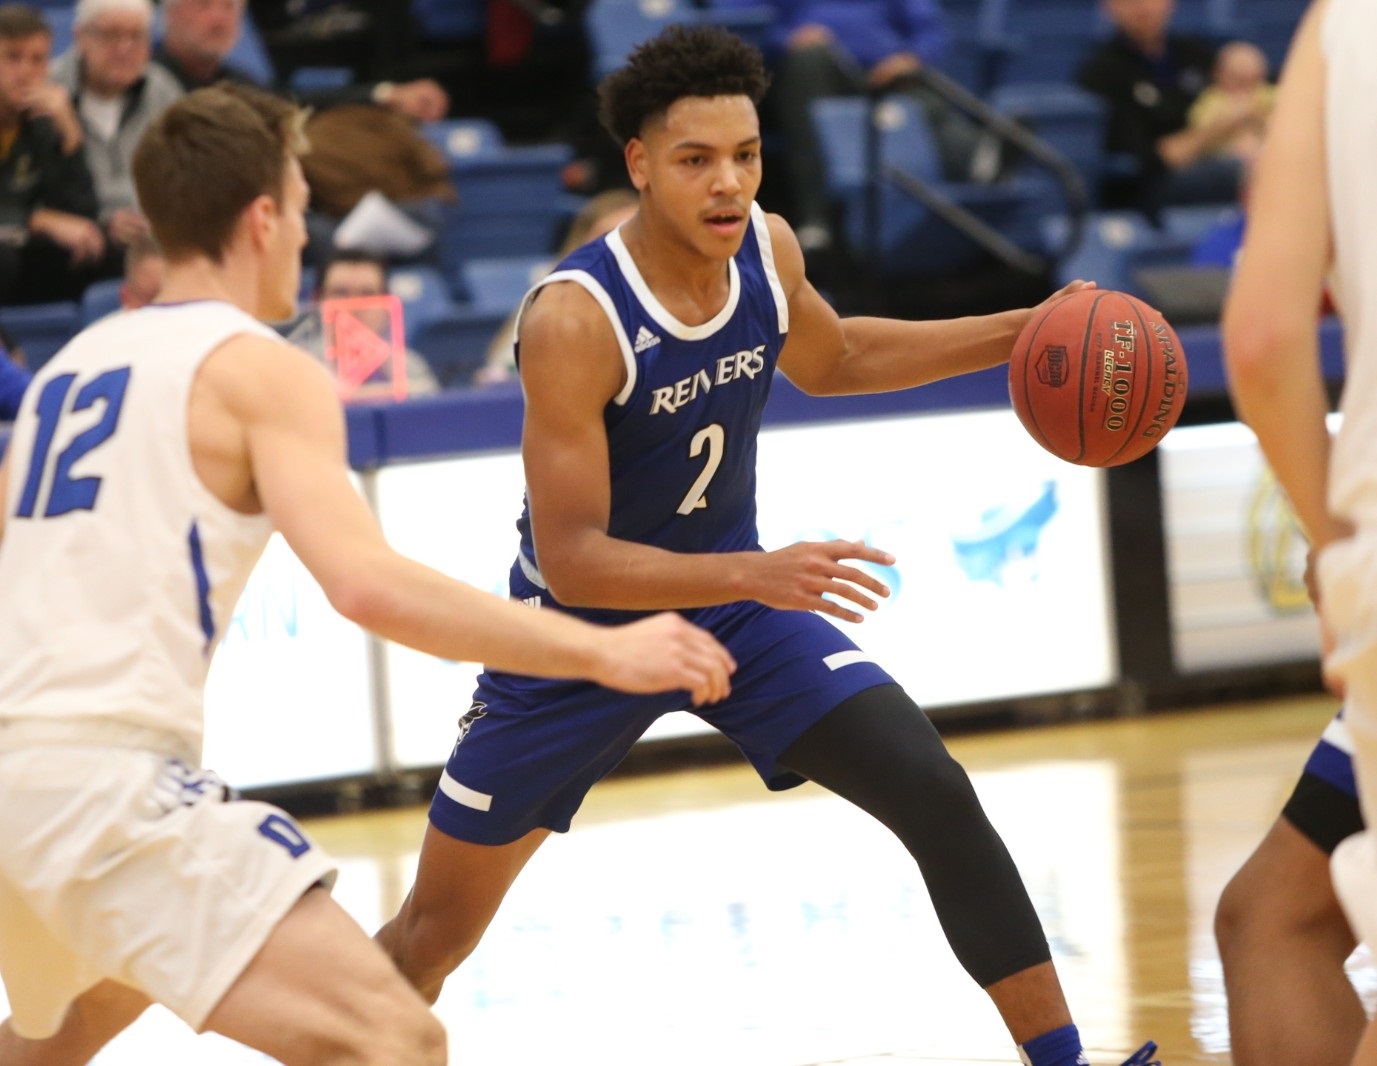 In his final game as a Reiver, Illinois State signee Josiah Strong scored 23pts in the Region XI Semi-Final at Southeastern.